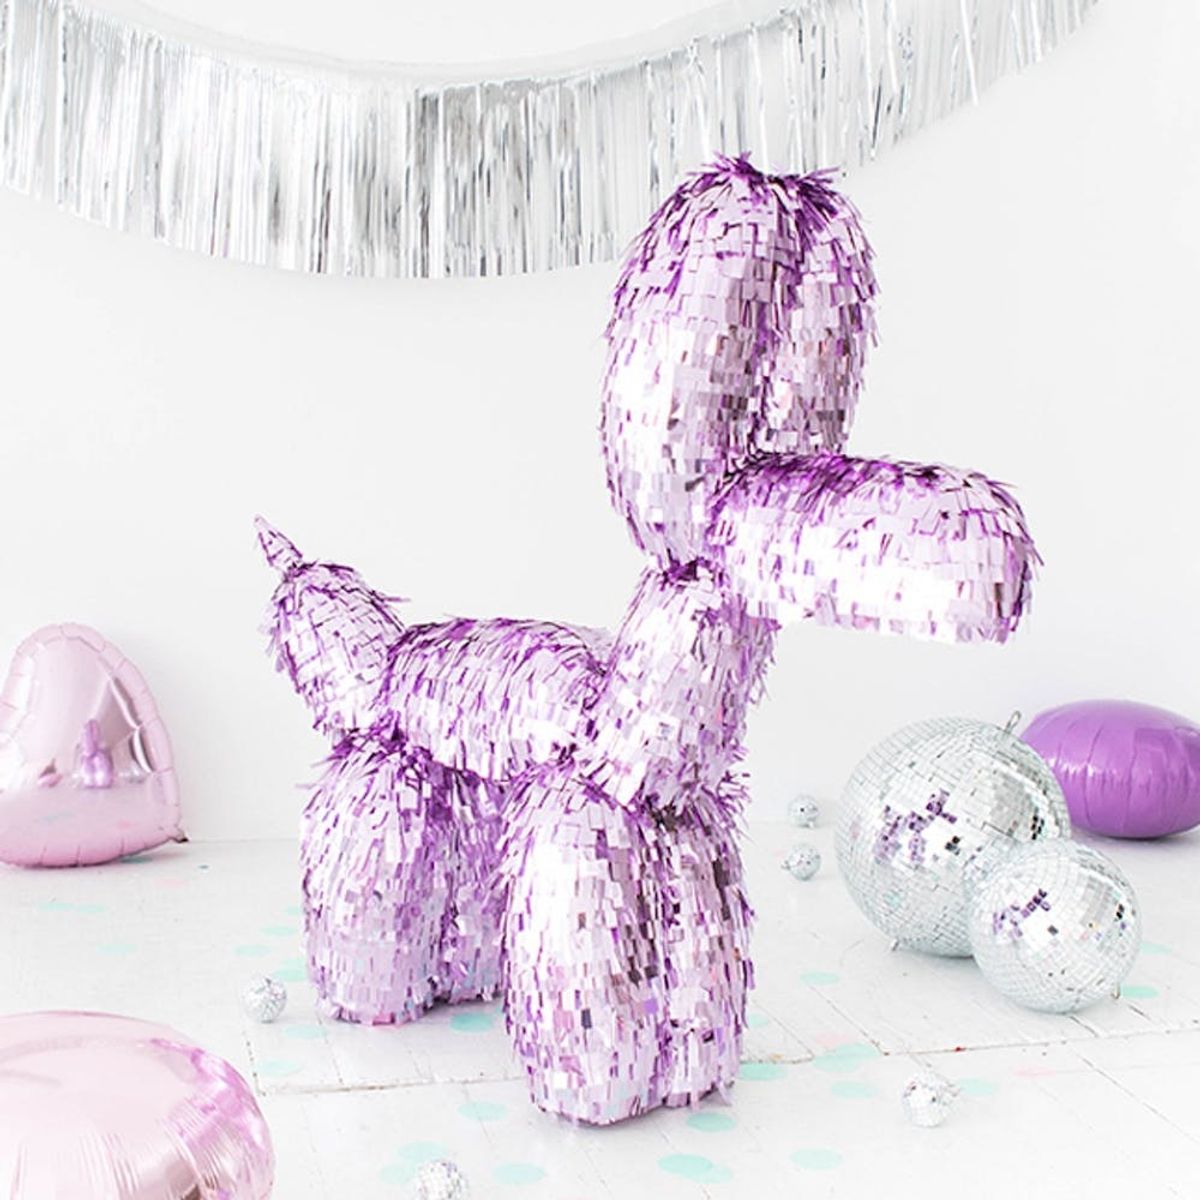 DIY Balloon Piñata Dog, Compliment Cakes, and More Easy Weekend Projects